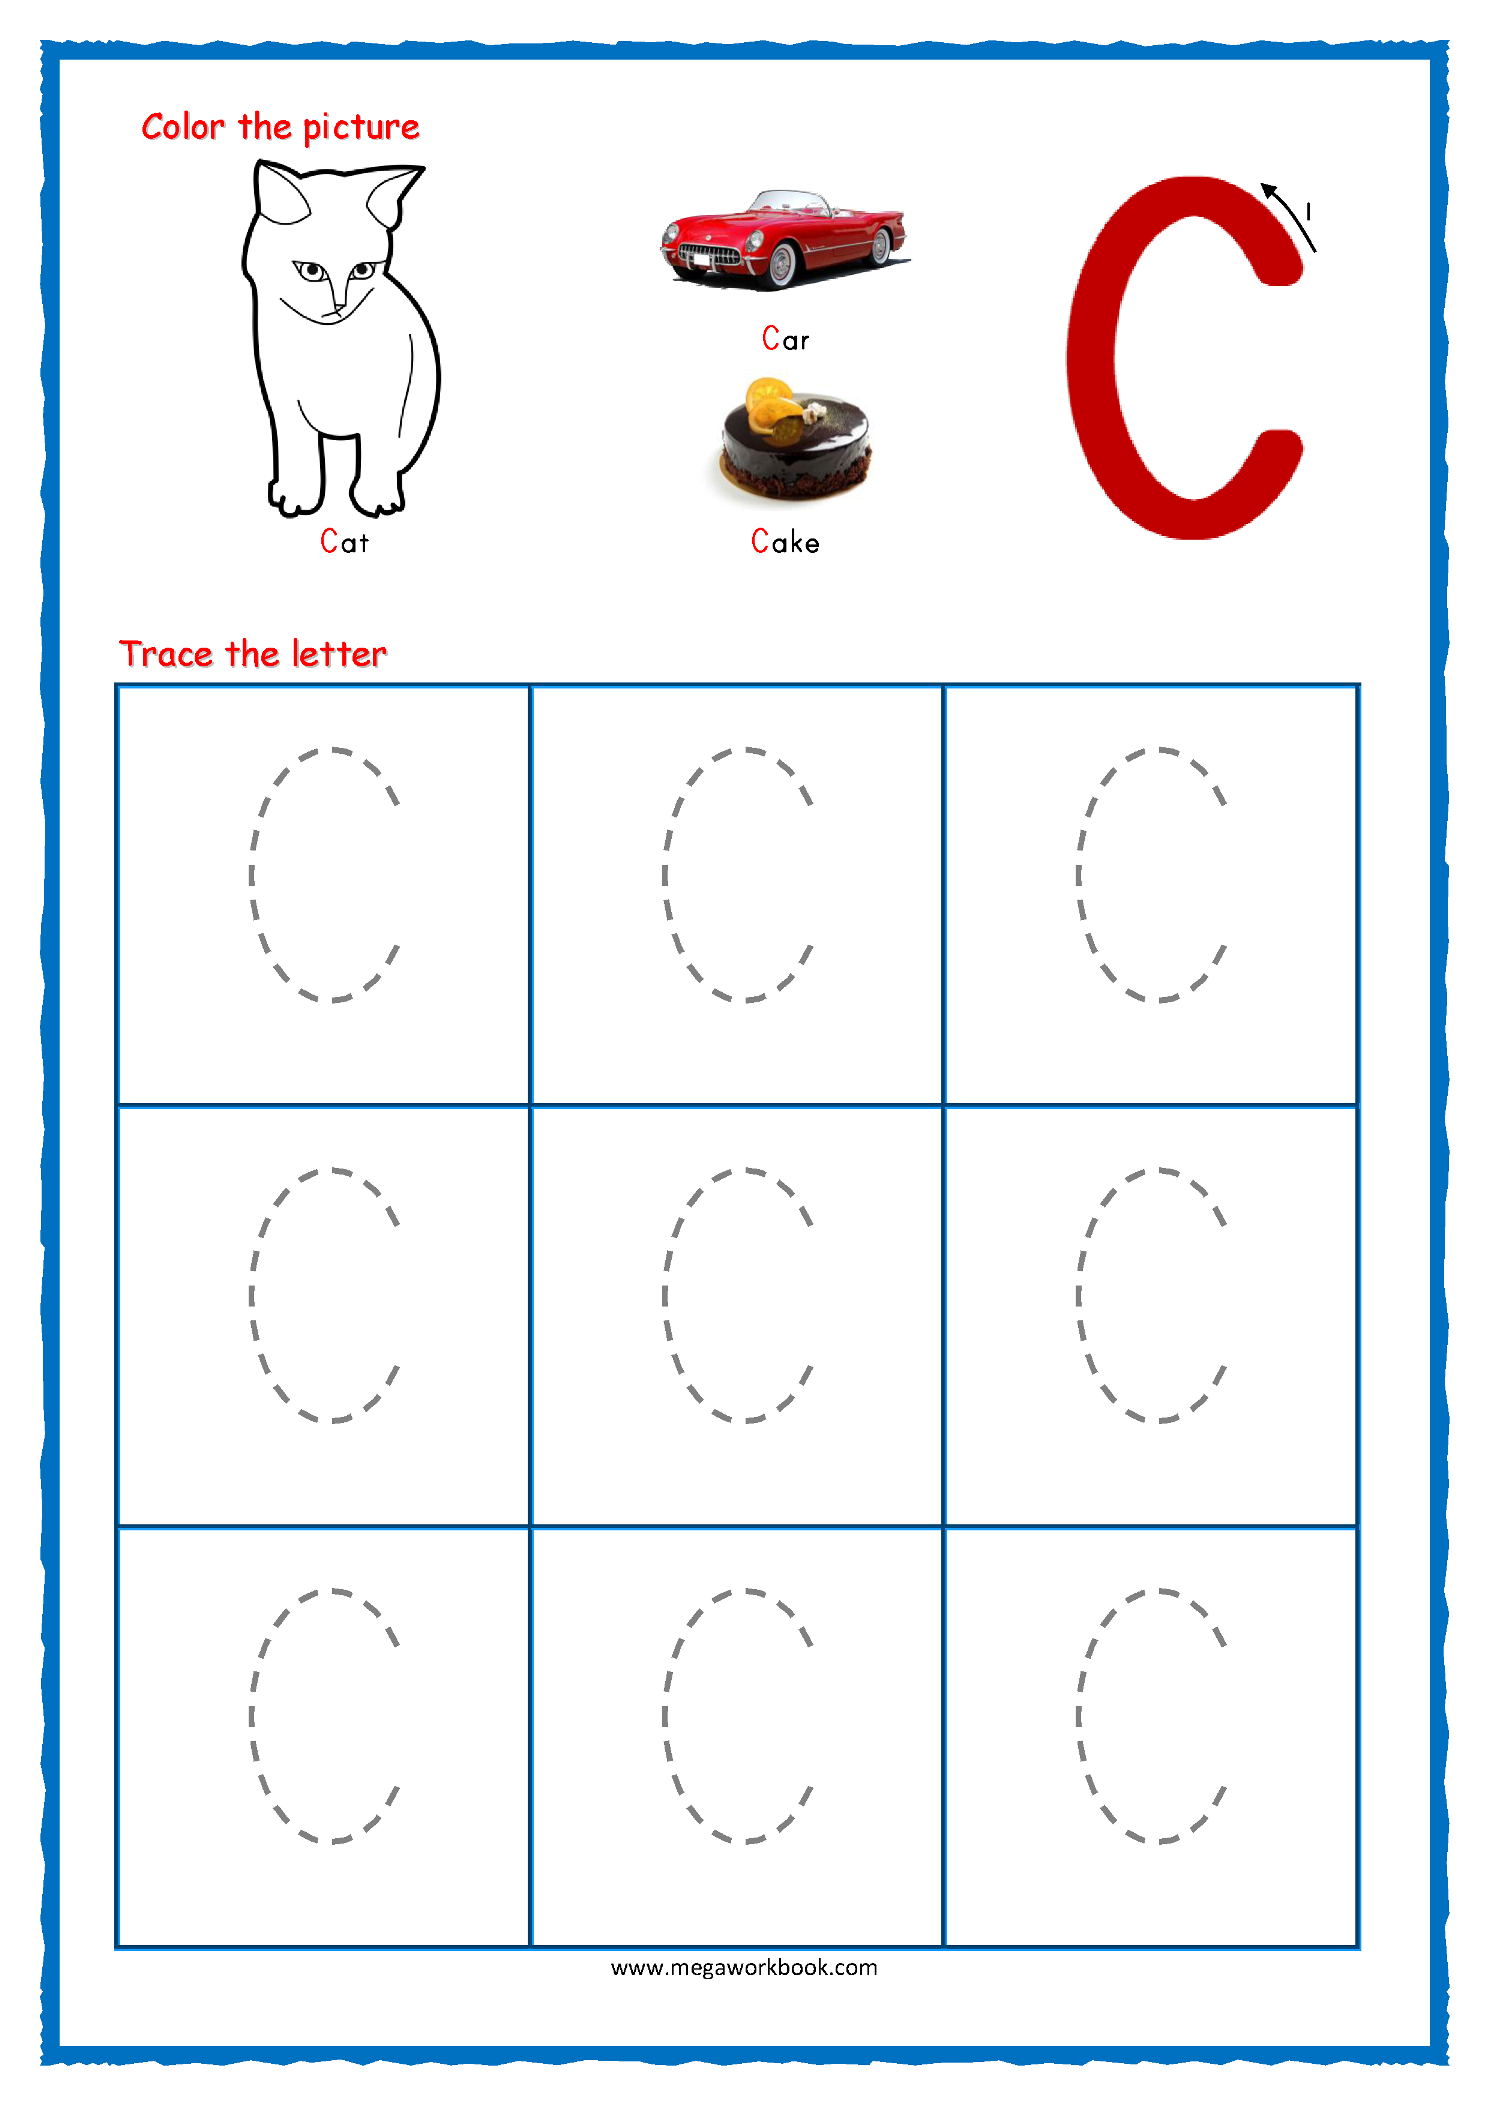 Tracing Letters - Alphabet Tracing - Capital Letters intended for Alphabet Tracing Worksheets For Preschool